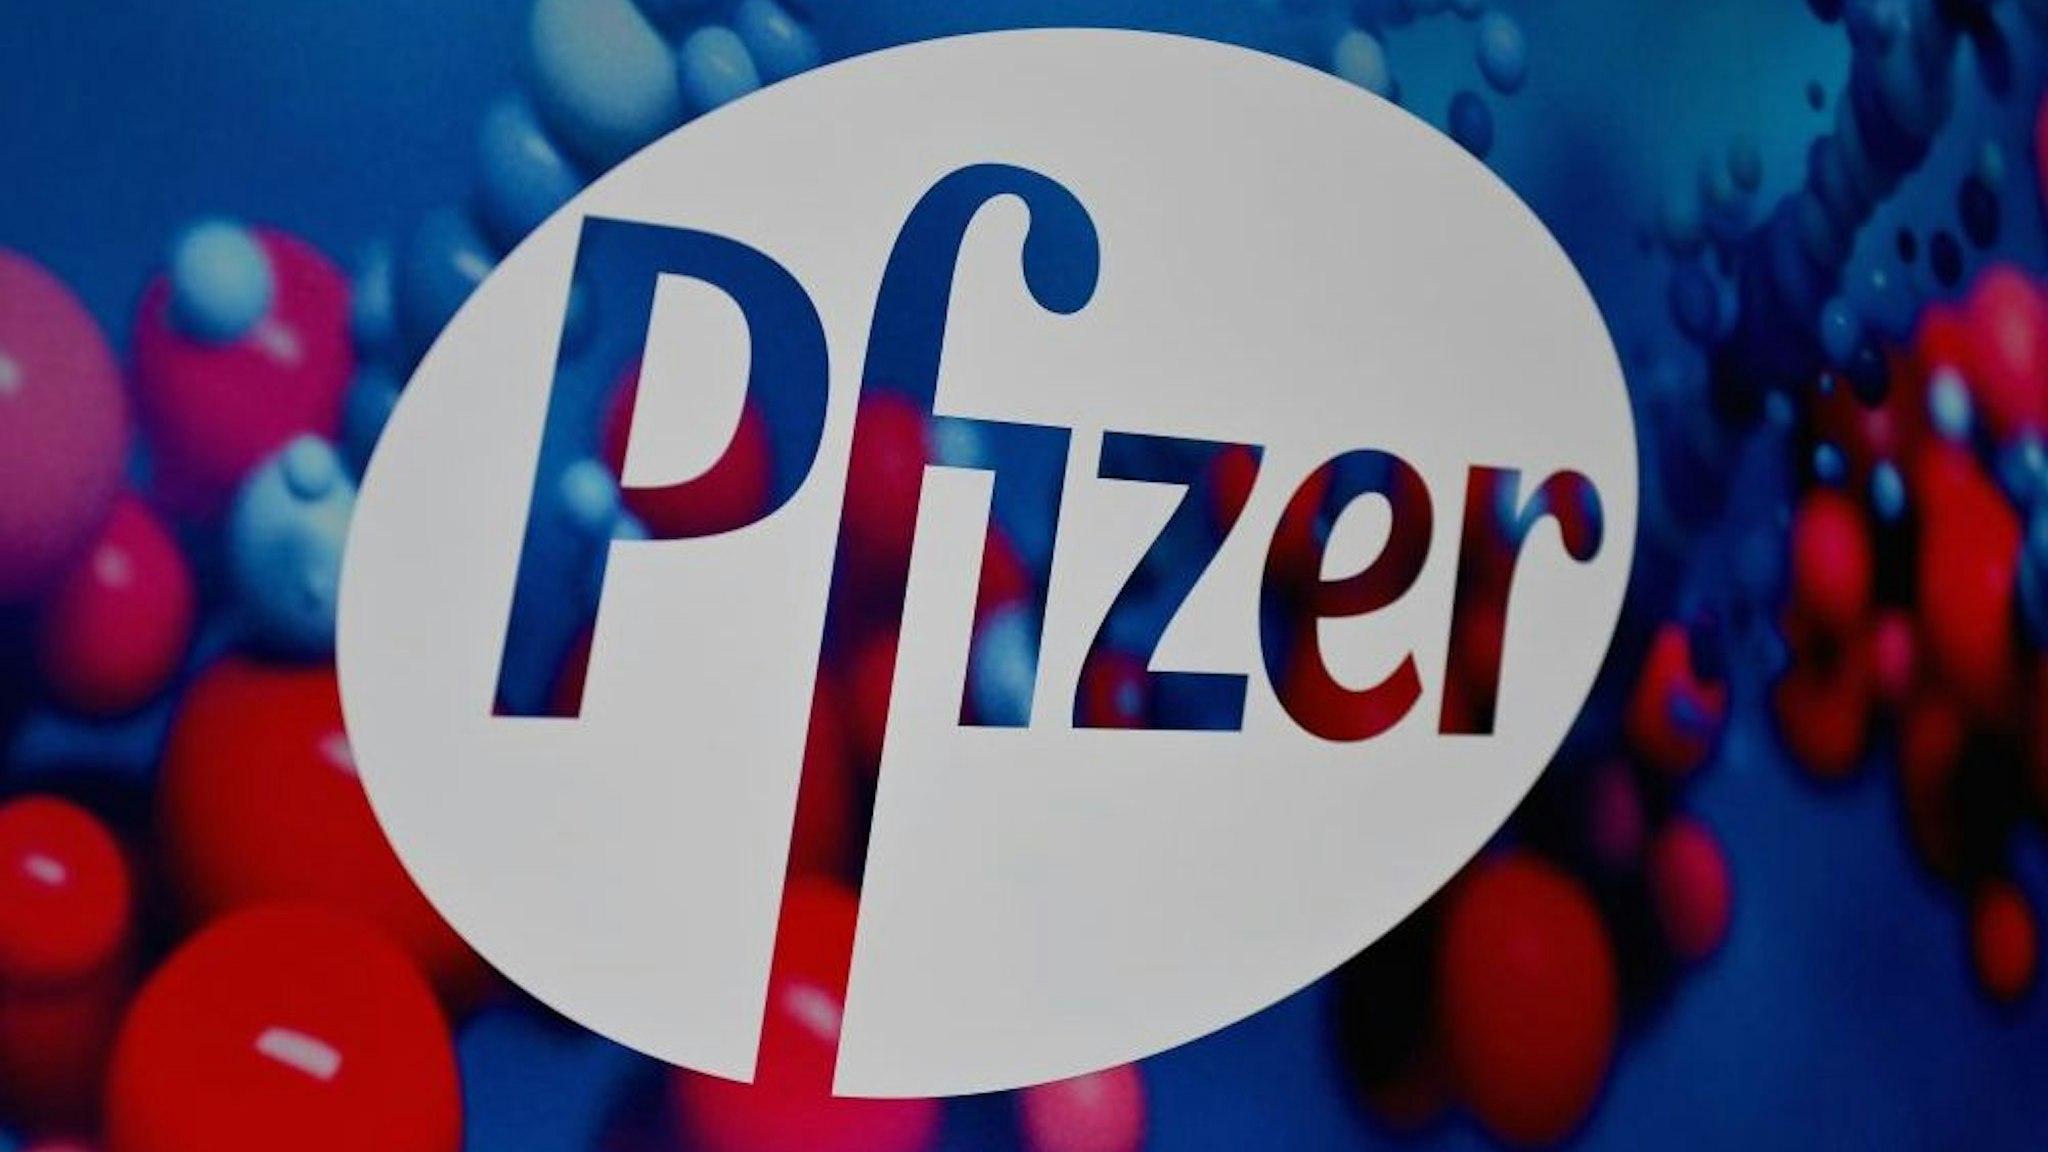 The Pfizer logo is seen at the Pfizer Inc. headquarters on December 9, 2020 in New York City.